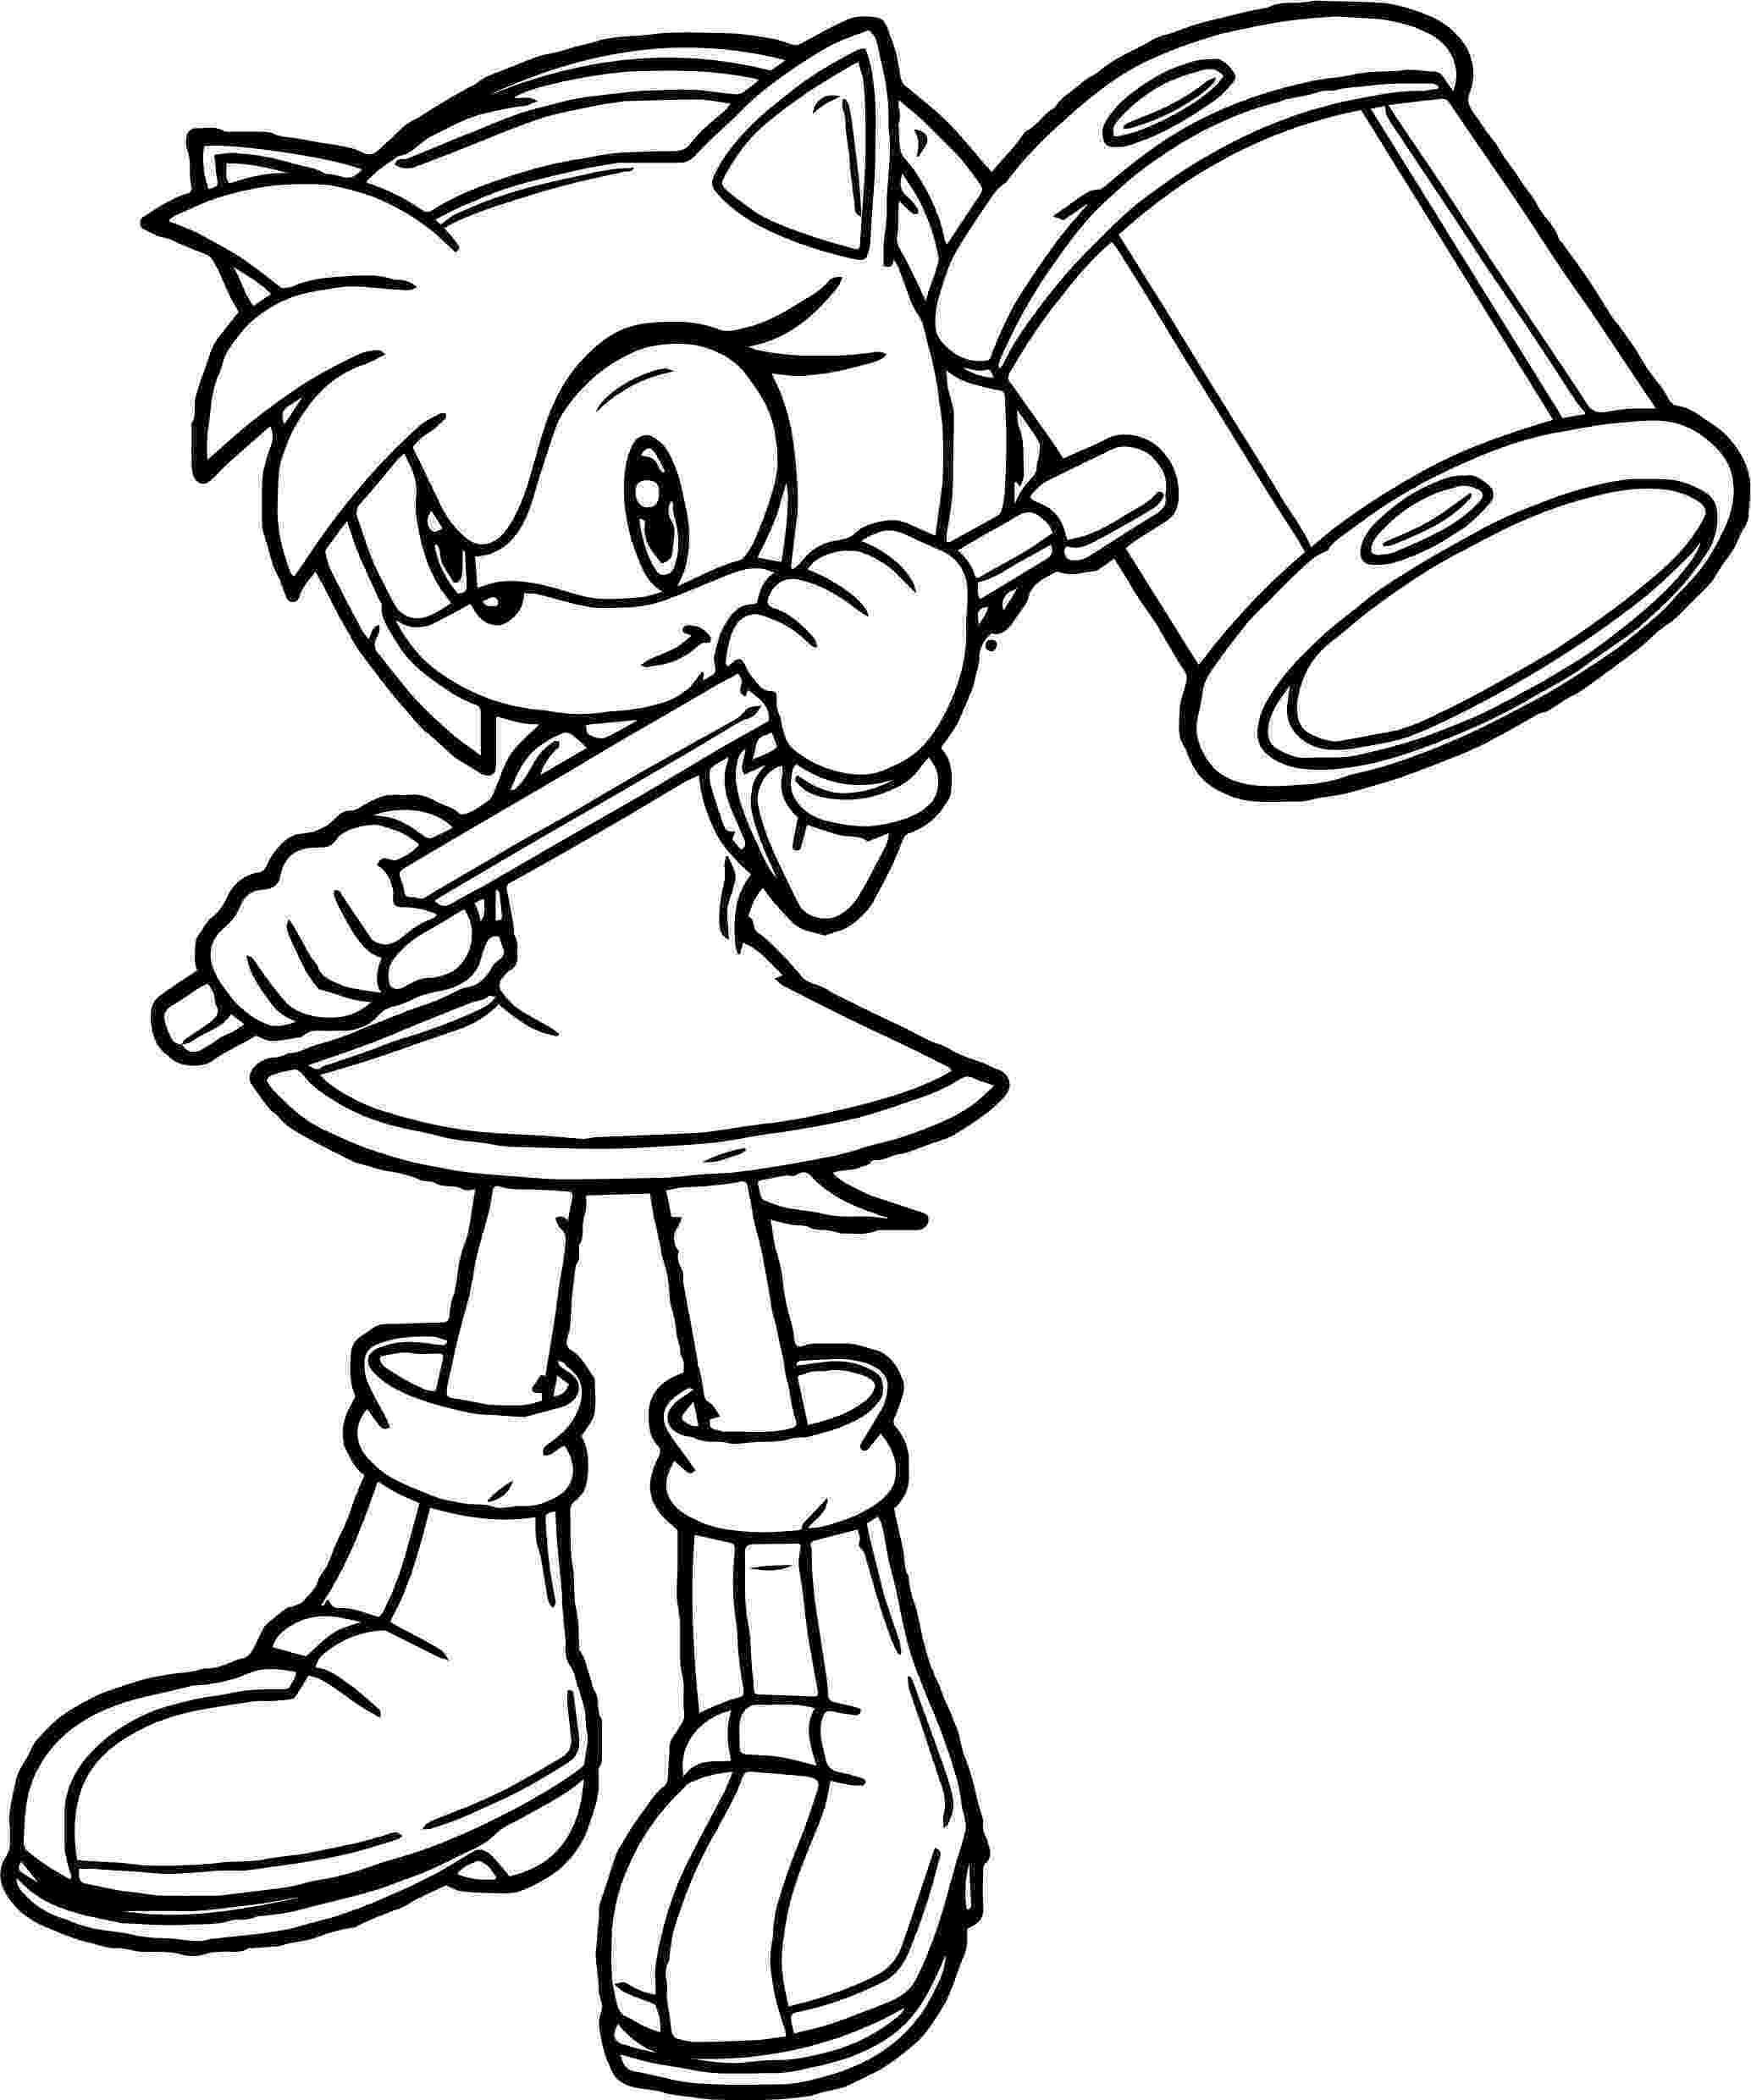 amy rose coloring pages one amy rose coloring pages wecoloringpagecom amy pages rose coloring 